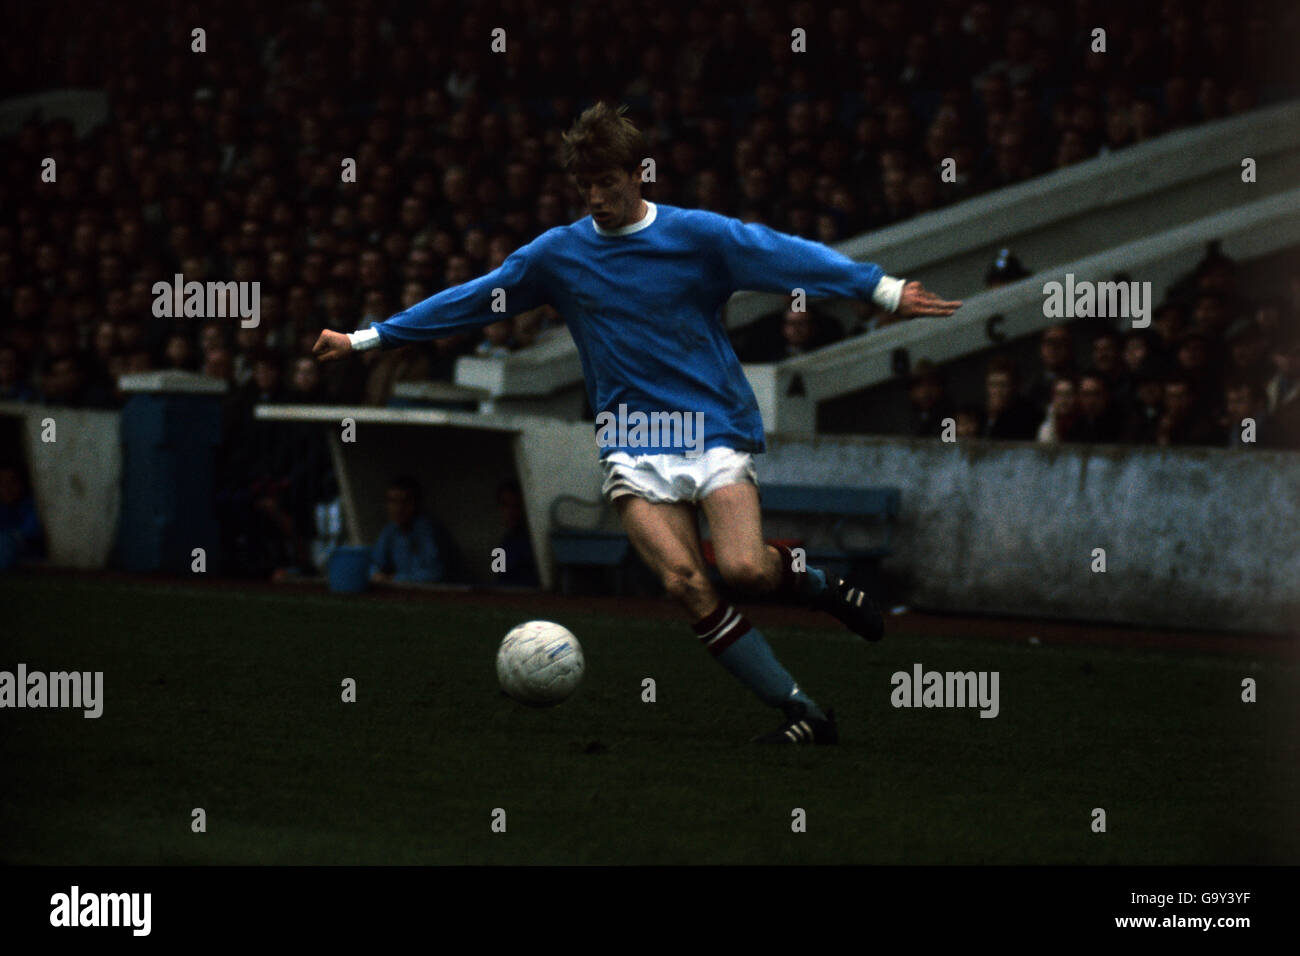 Fußball - Football League Division One - Manchester City / Woverhampton Wanderers - Maine Road. Colin Bell, Manchester City Stockfoto